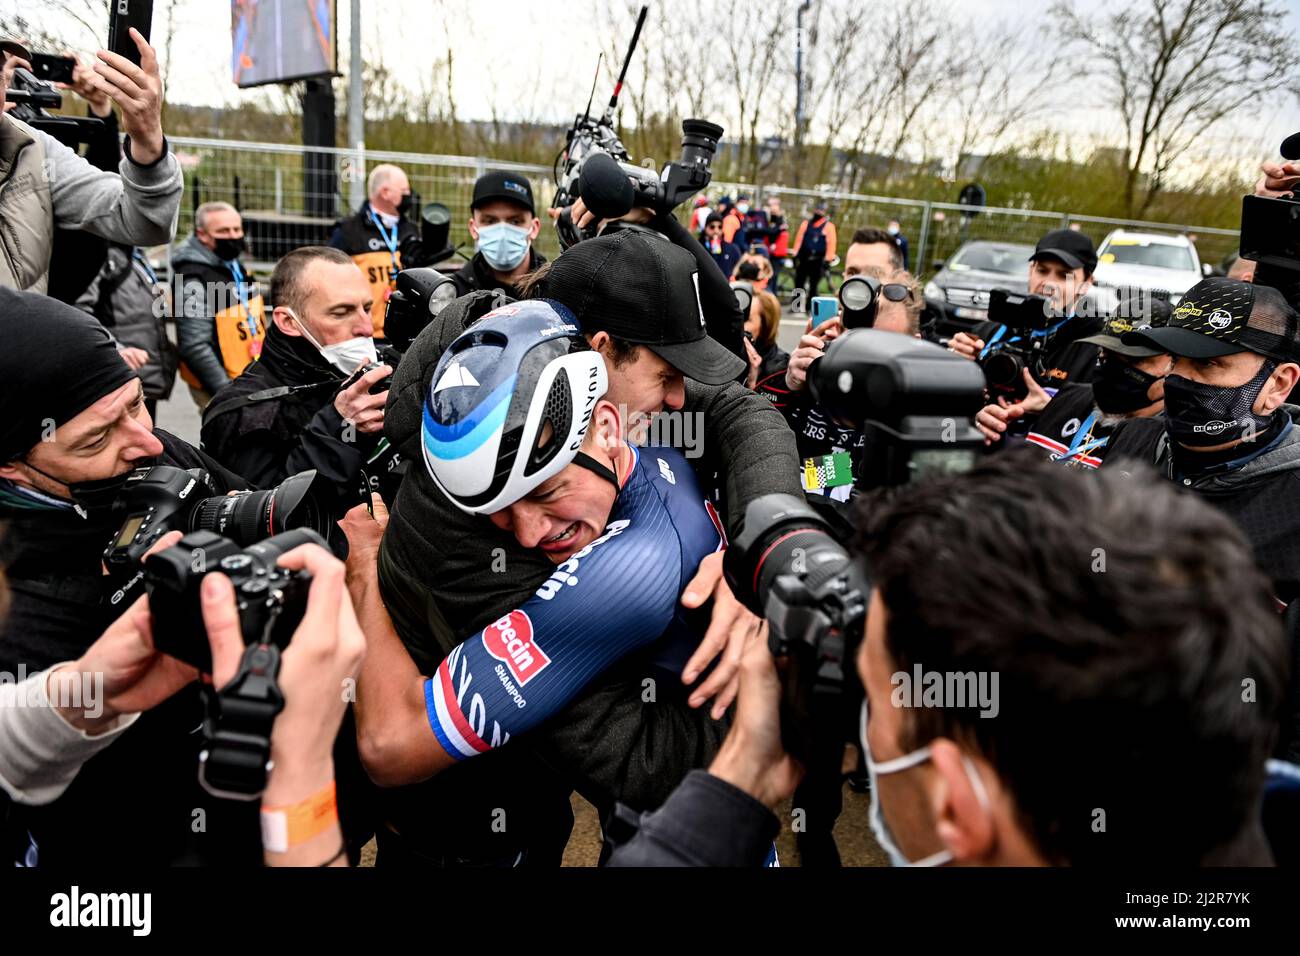 Belgium. 3rd April 2022, Belgium. The 2022 Tour of Flanders from Antwerp (Antwerpen) to Oudenaarde. Mathieu Van Der Poel for team AlpecinFenix (NED) embraces his team mate on the finish line after winning the stage. Credit: Peter Goding/Alamy Live News Stock Photo